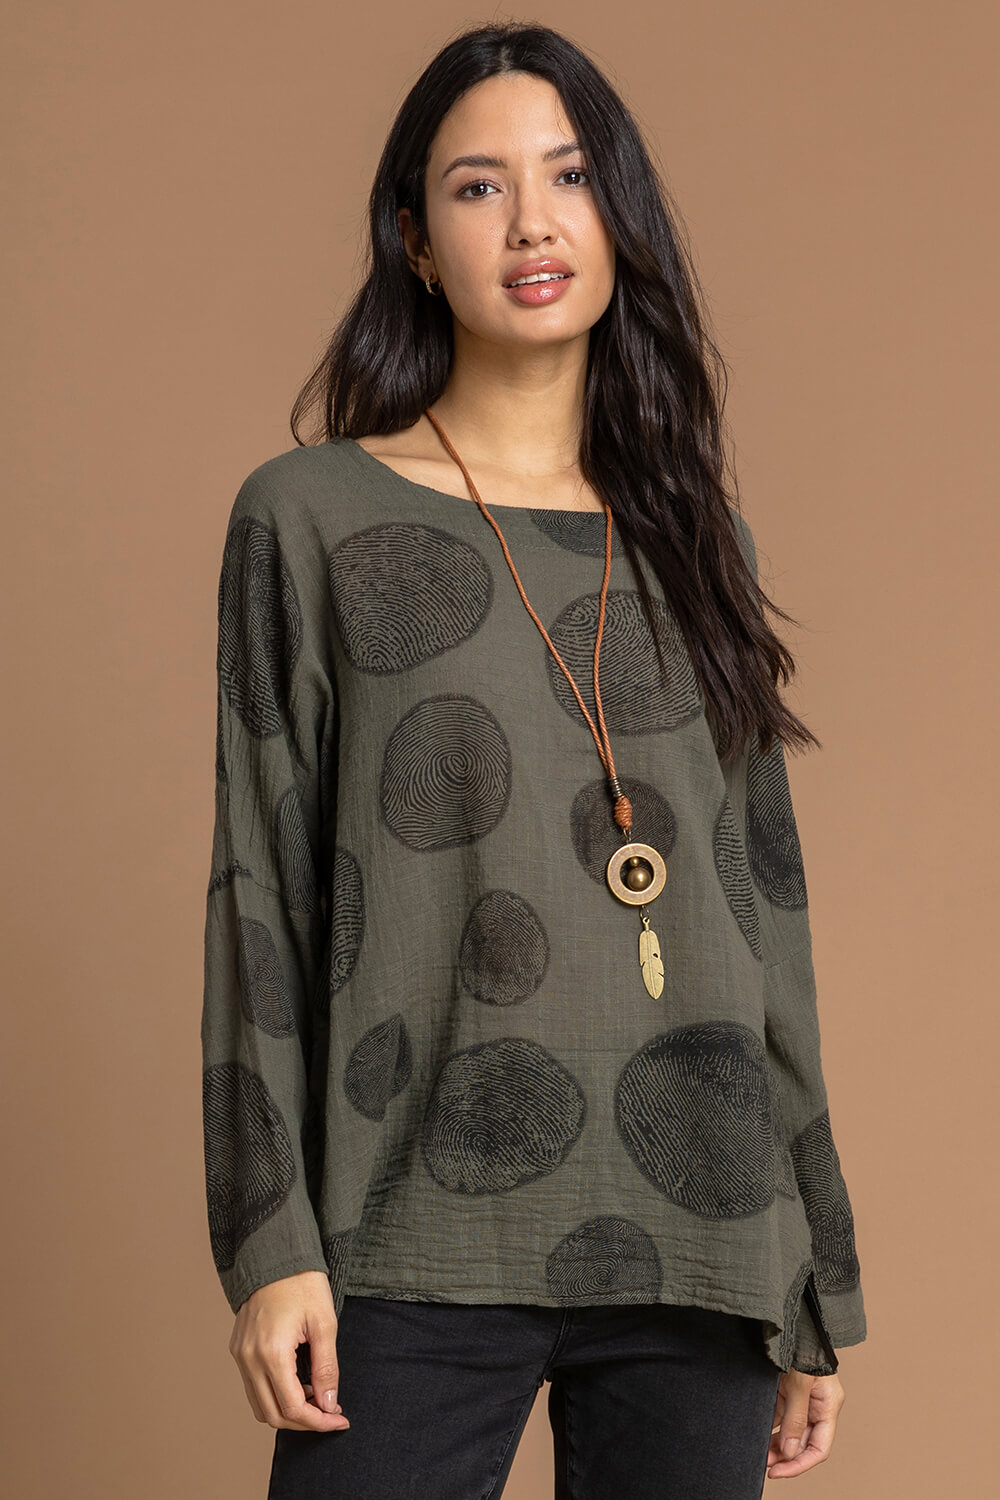 Spot Print Top With Necklace